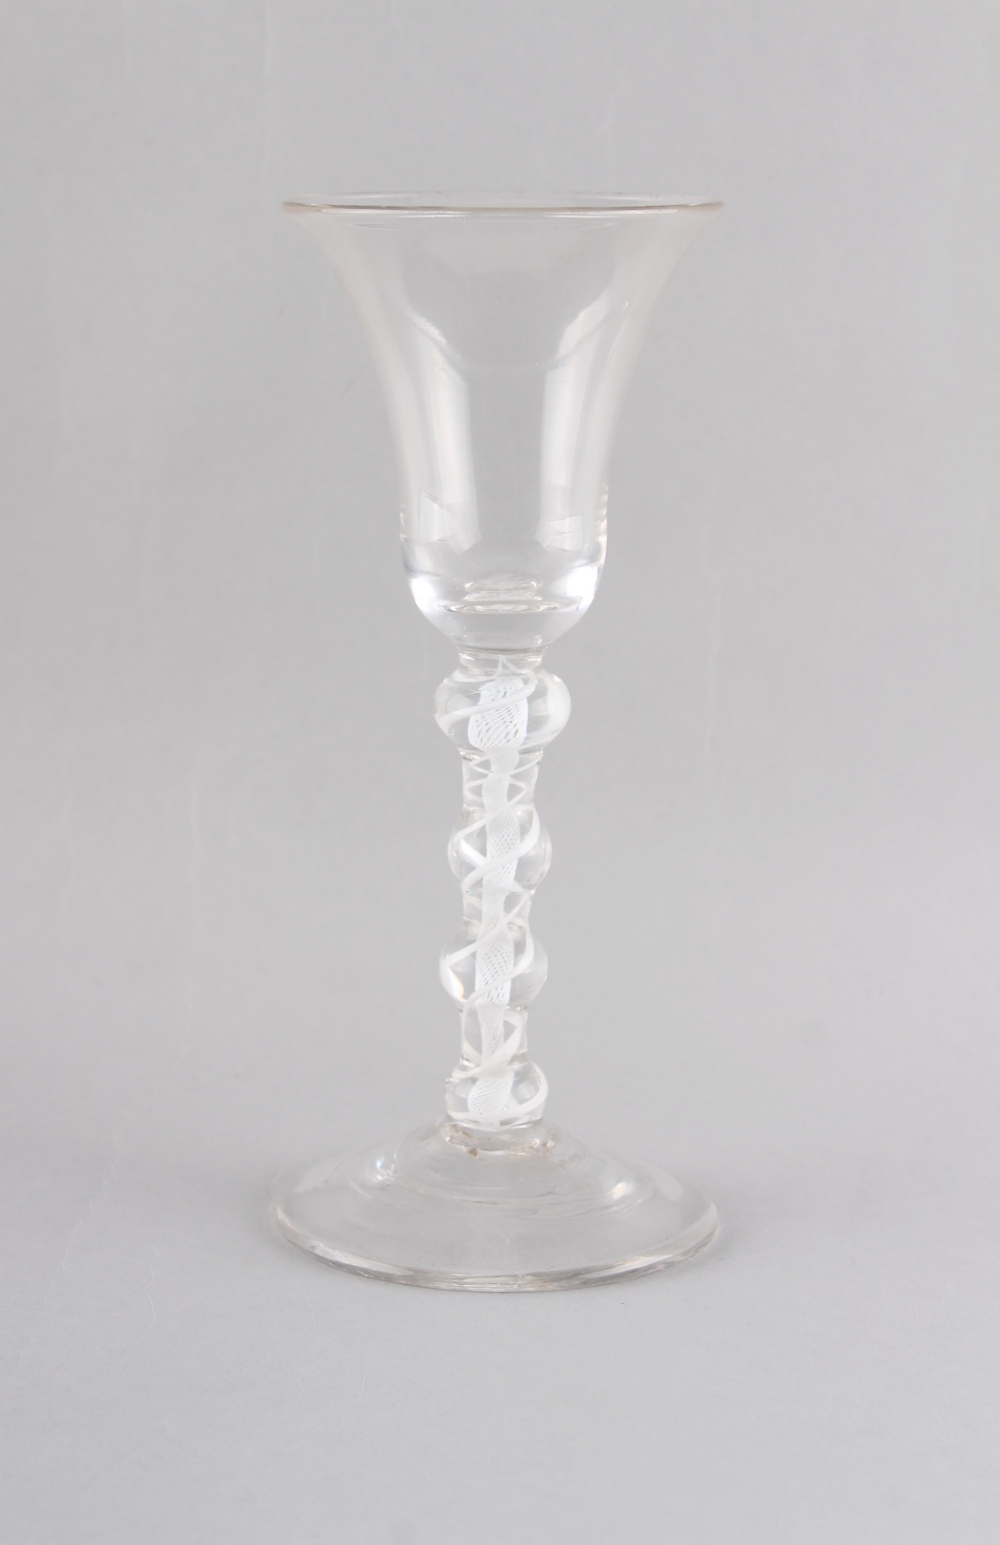 Property of a deceased estate - an unusual 18th century drinking glass, circa 1760, with bell bowl